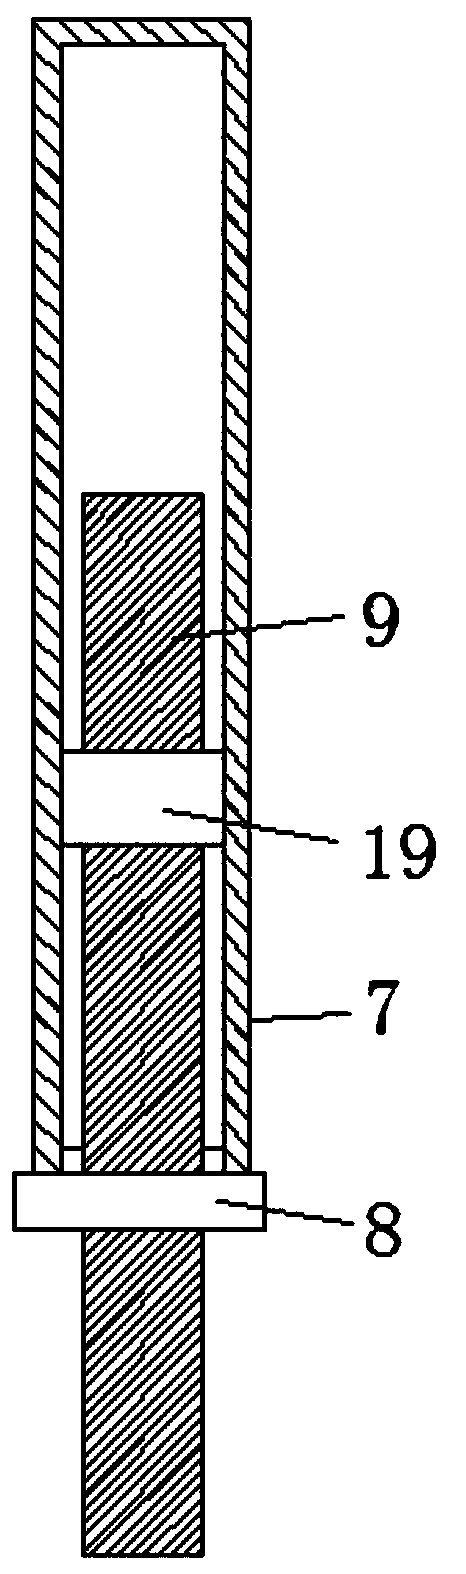 Fabricated hoisting and fixing device for containers